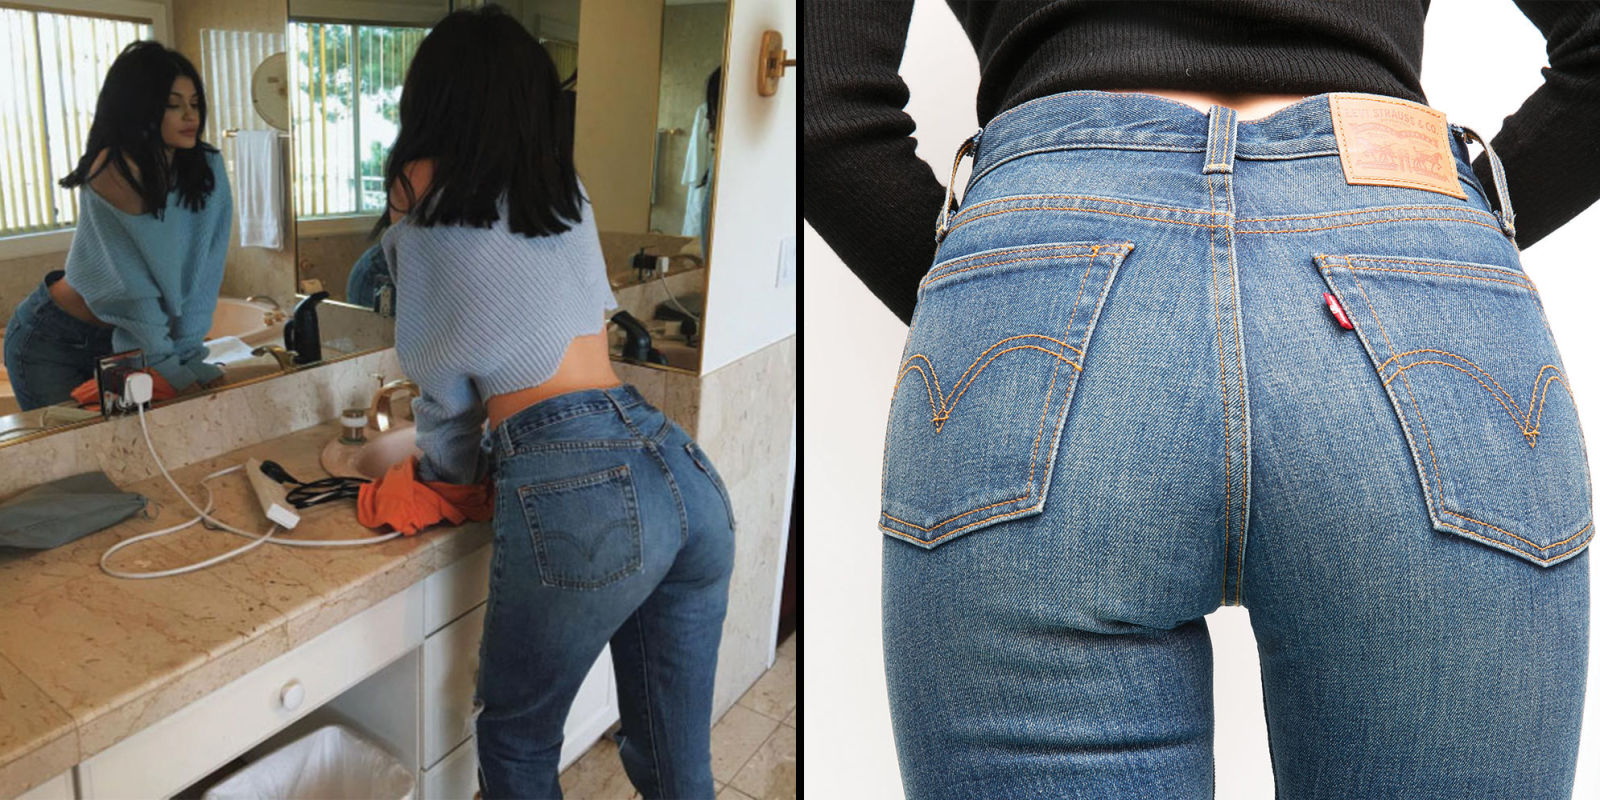 Best of All that ass in them jeans